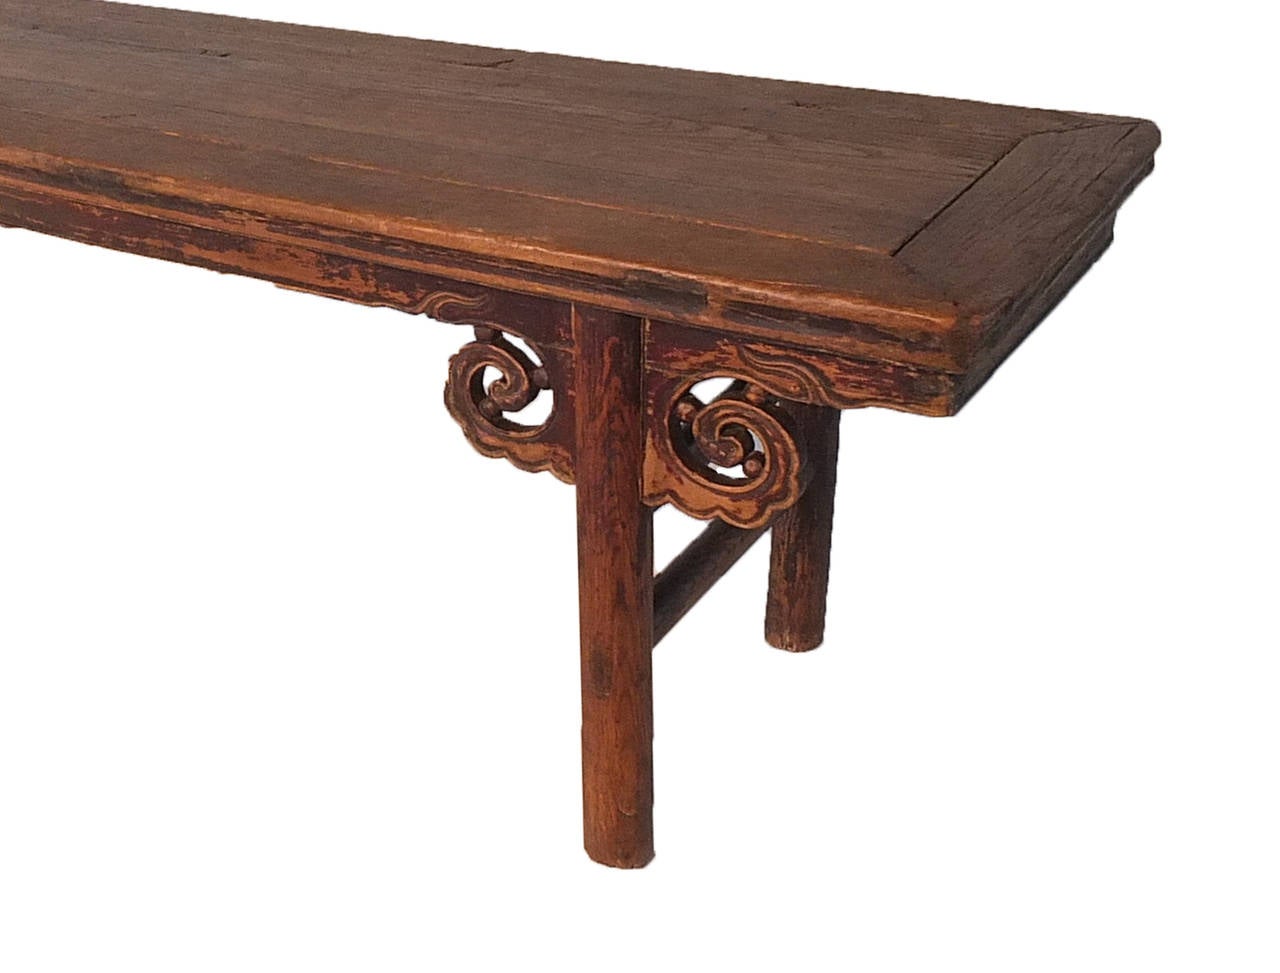 A Kang table, modernly referred to as a bench is a type of Chinese furniture that serves a dual purpose as both a low table and a chair-level bed. This particular example has cloud motif apron-head spandrels and round legs.